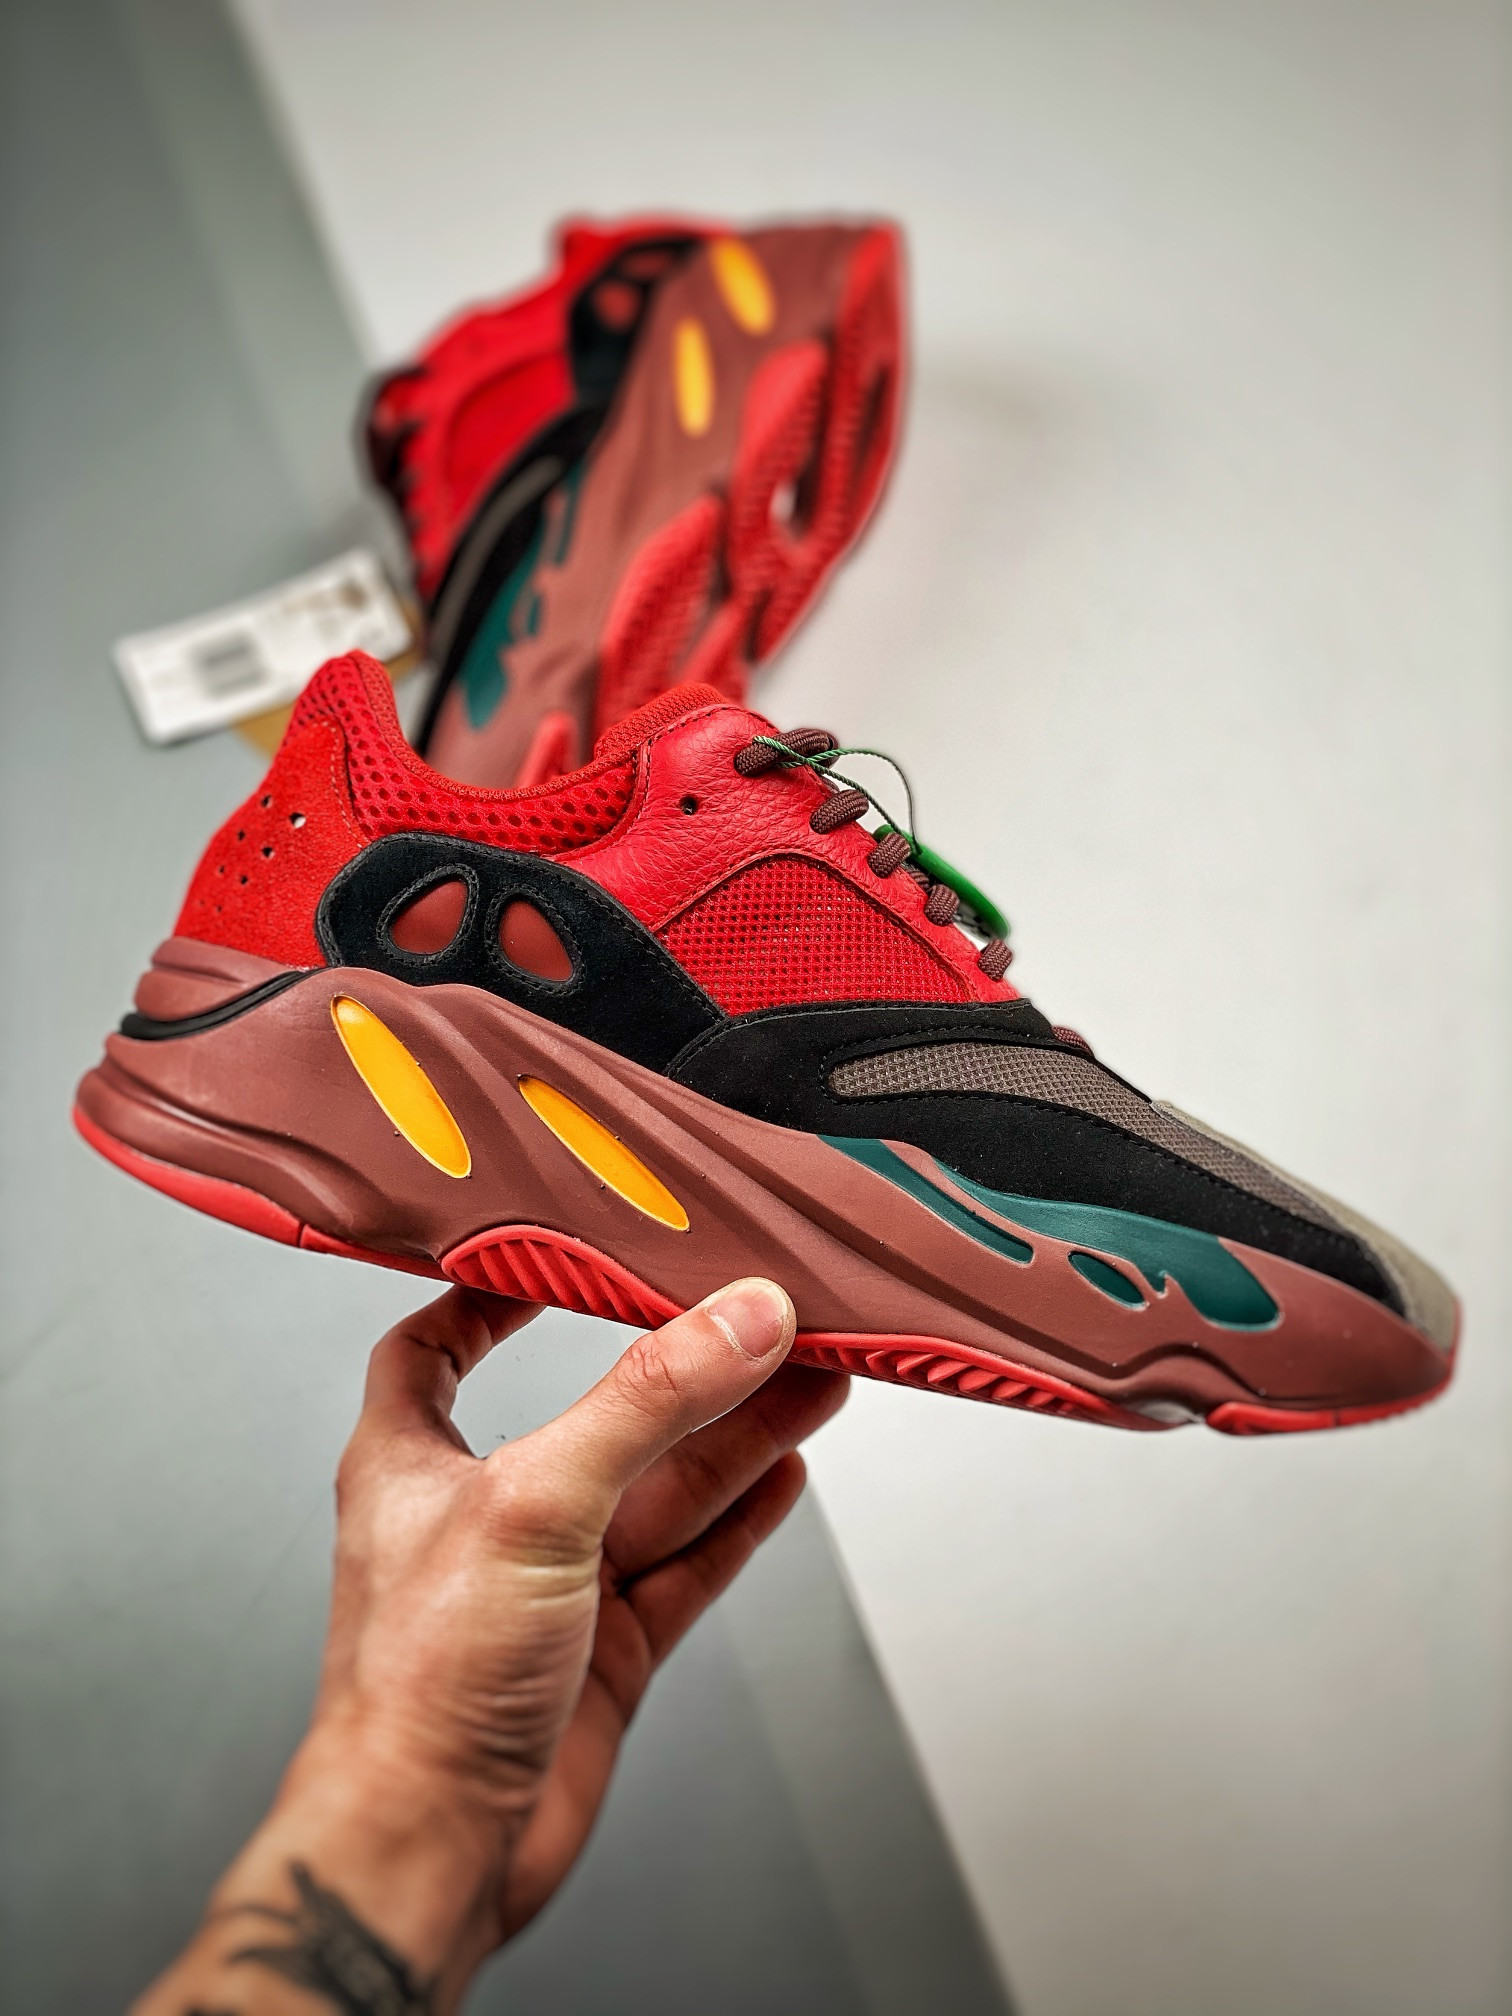 Adidas Yeezy Boost 700 Hi-Res Red HQ6979 For Sale